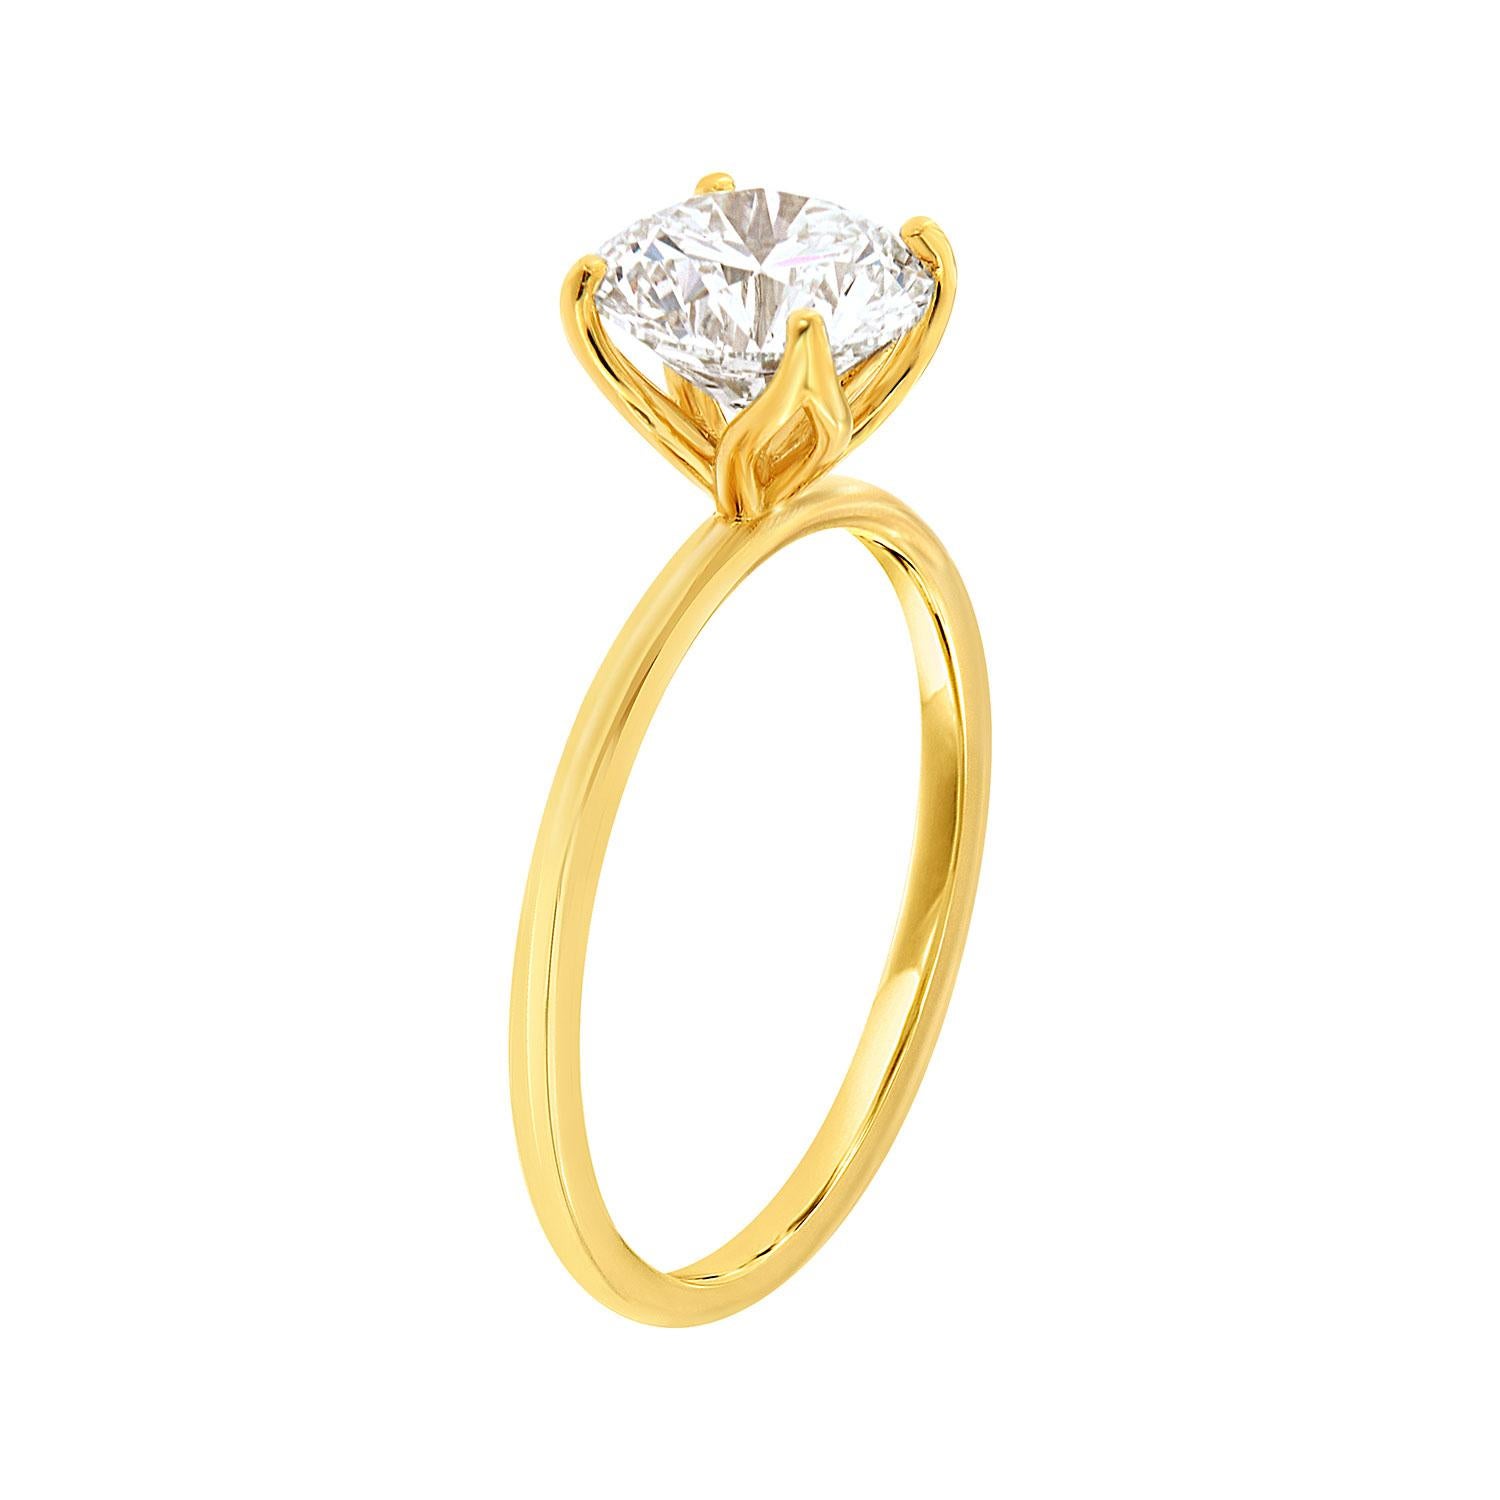 This unique 18K Yellow Gold  solitaire setting features a 1.81 Carat Round Shape Natural Diamond GIA Certificate number 2215506263 set in a Tulip-designed crown on top of a 1.8 mm band. The diamond is J in color and face up white. The diamond